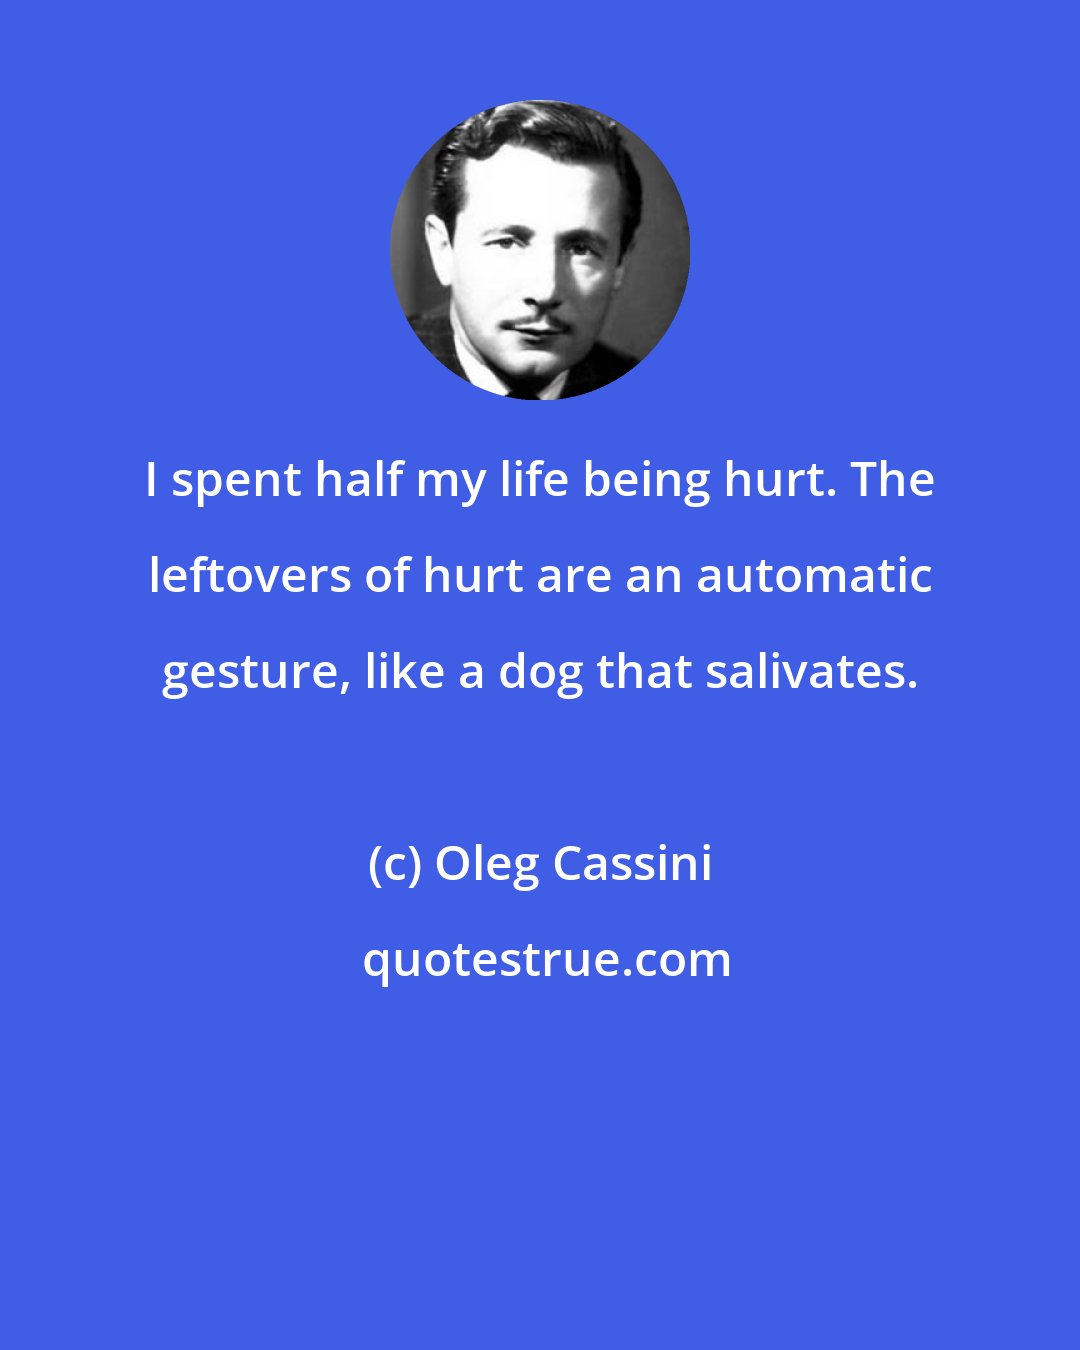 Oleg Cassini: I spent half my life being hurt. The leftovers of hurt are an automatic gesture, like a dog that salivates.